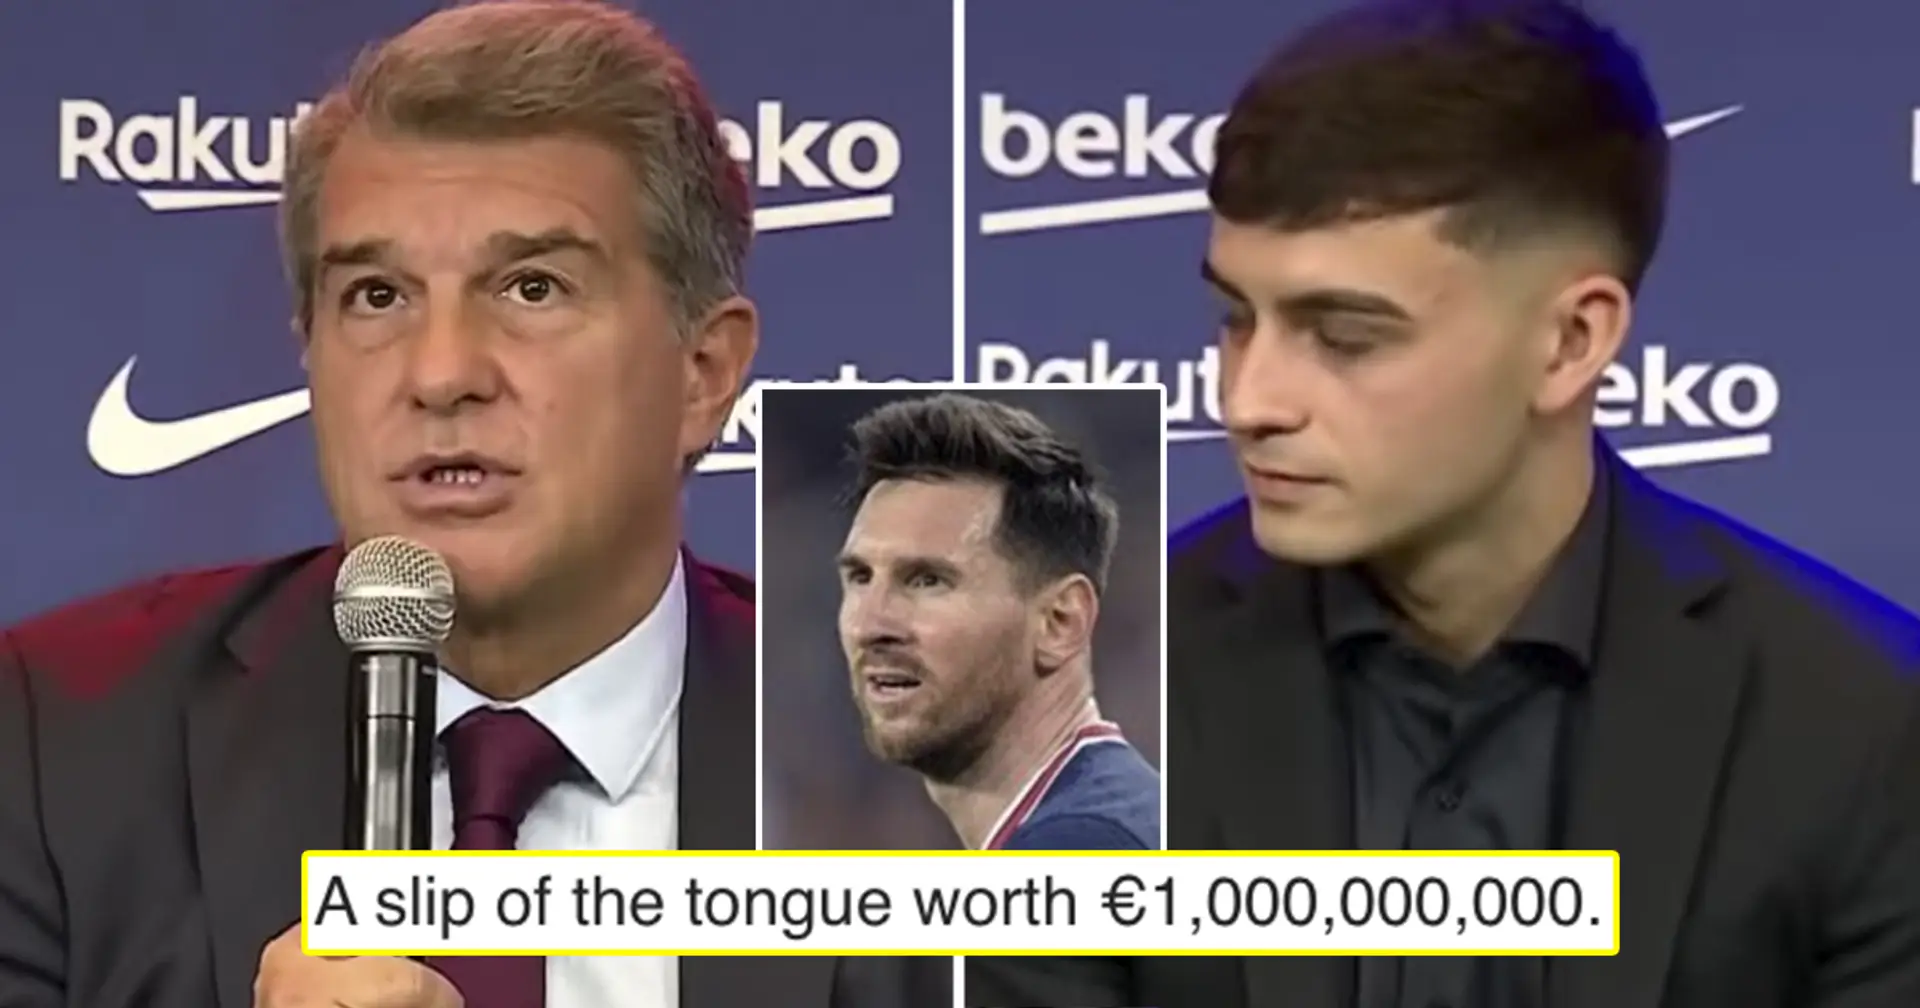 'If I were Pedri, I would re-read the contract': Fans react as Laporta mistakenly calls 18-year-old 'Messi' at presser